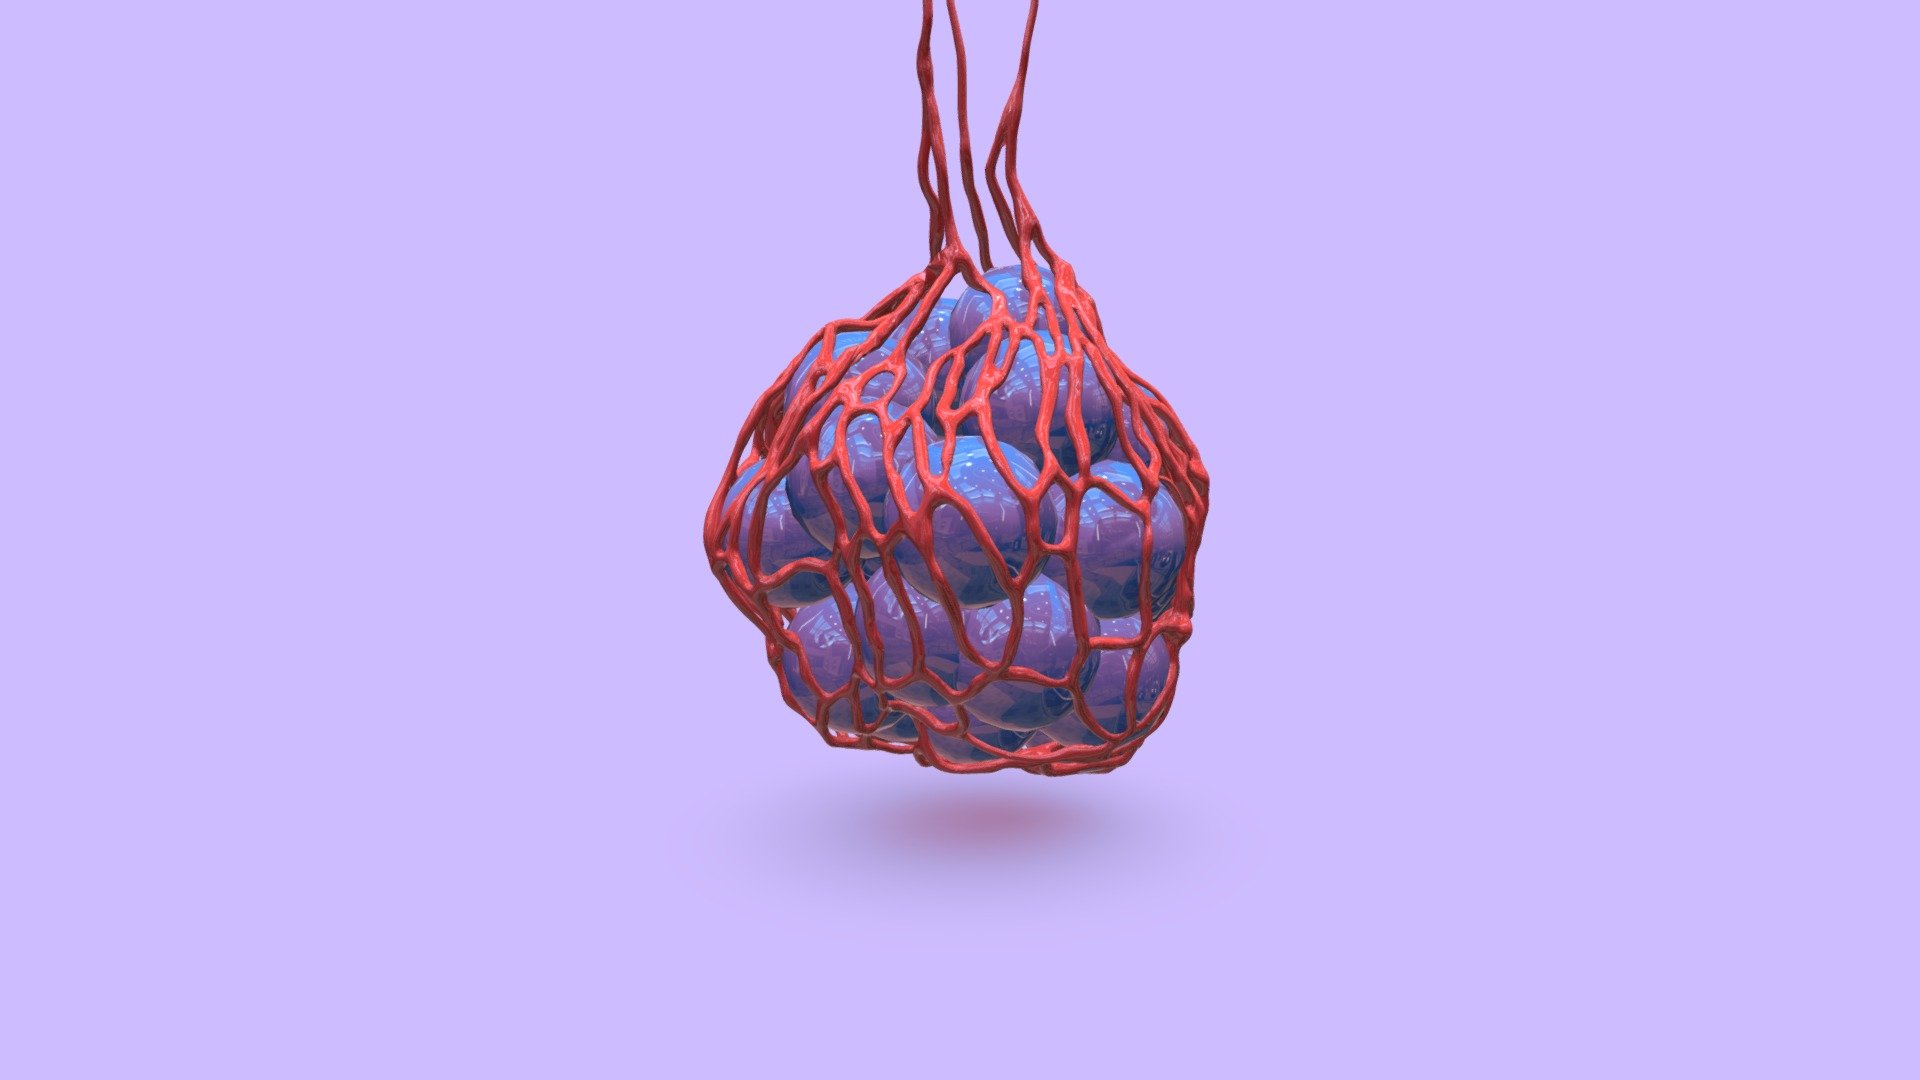 Alveoli are tiny air sacs in your lungs that take up the oxygen you breathe in and keep your body going. Although they’re microscopic, alveoli are the workhorses of your respiratory system 3d model